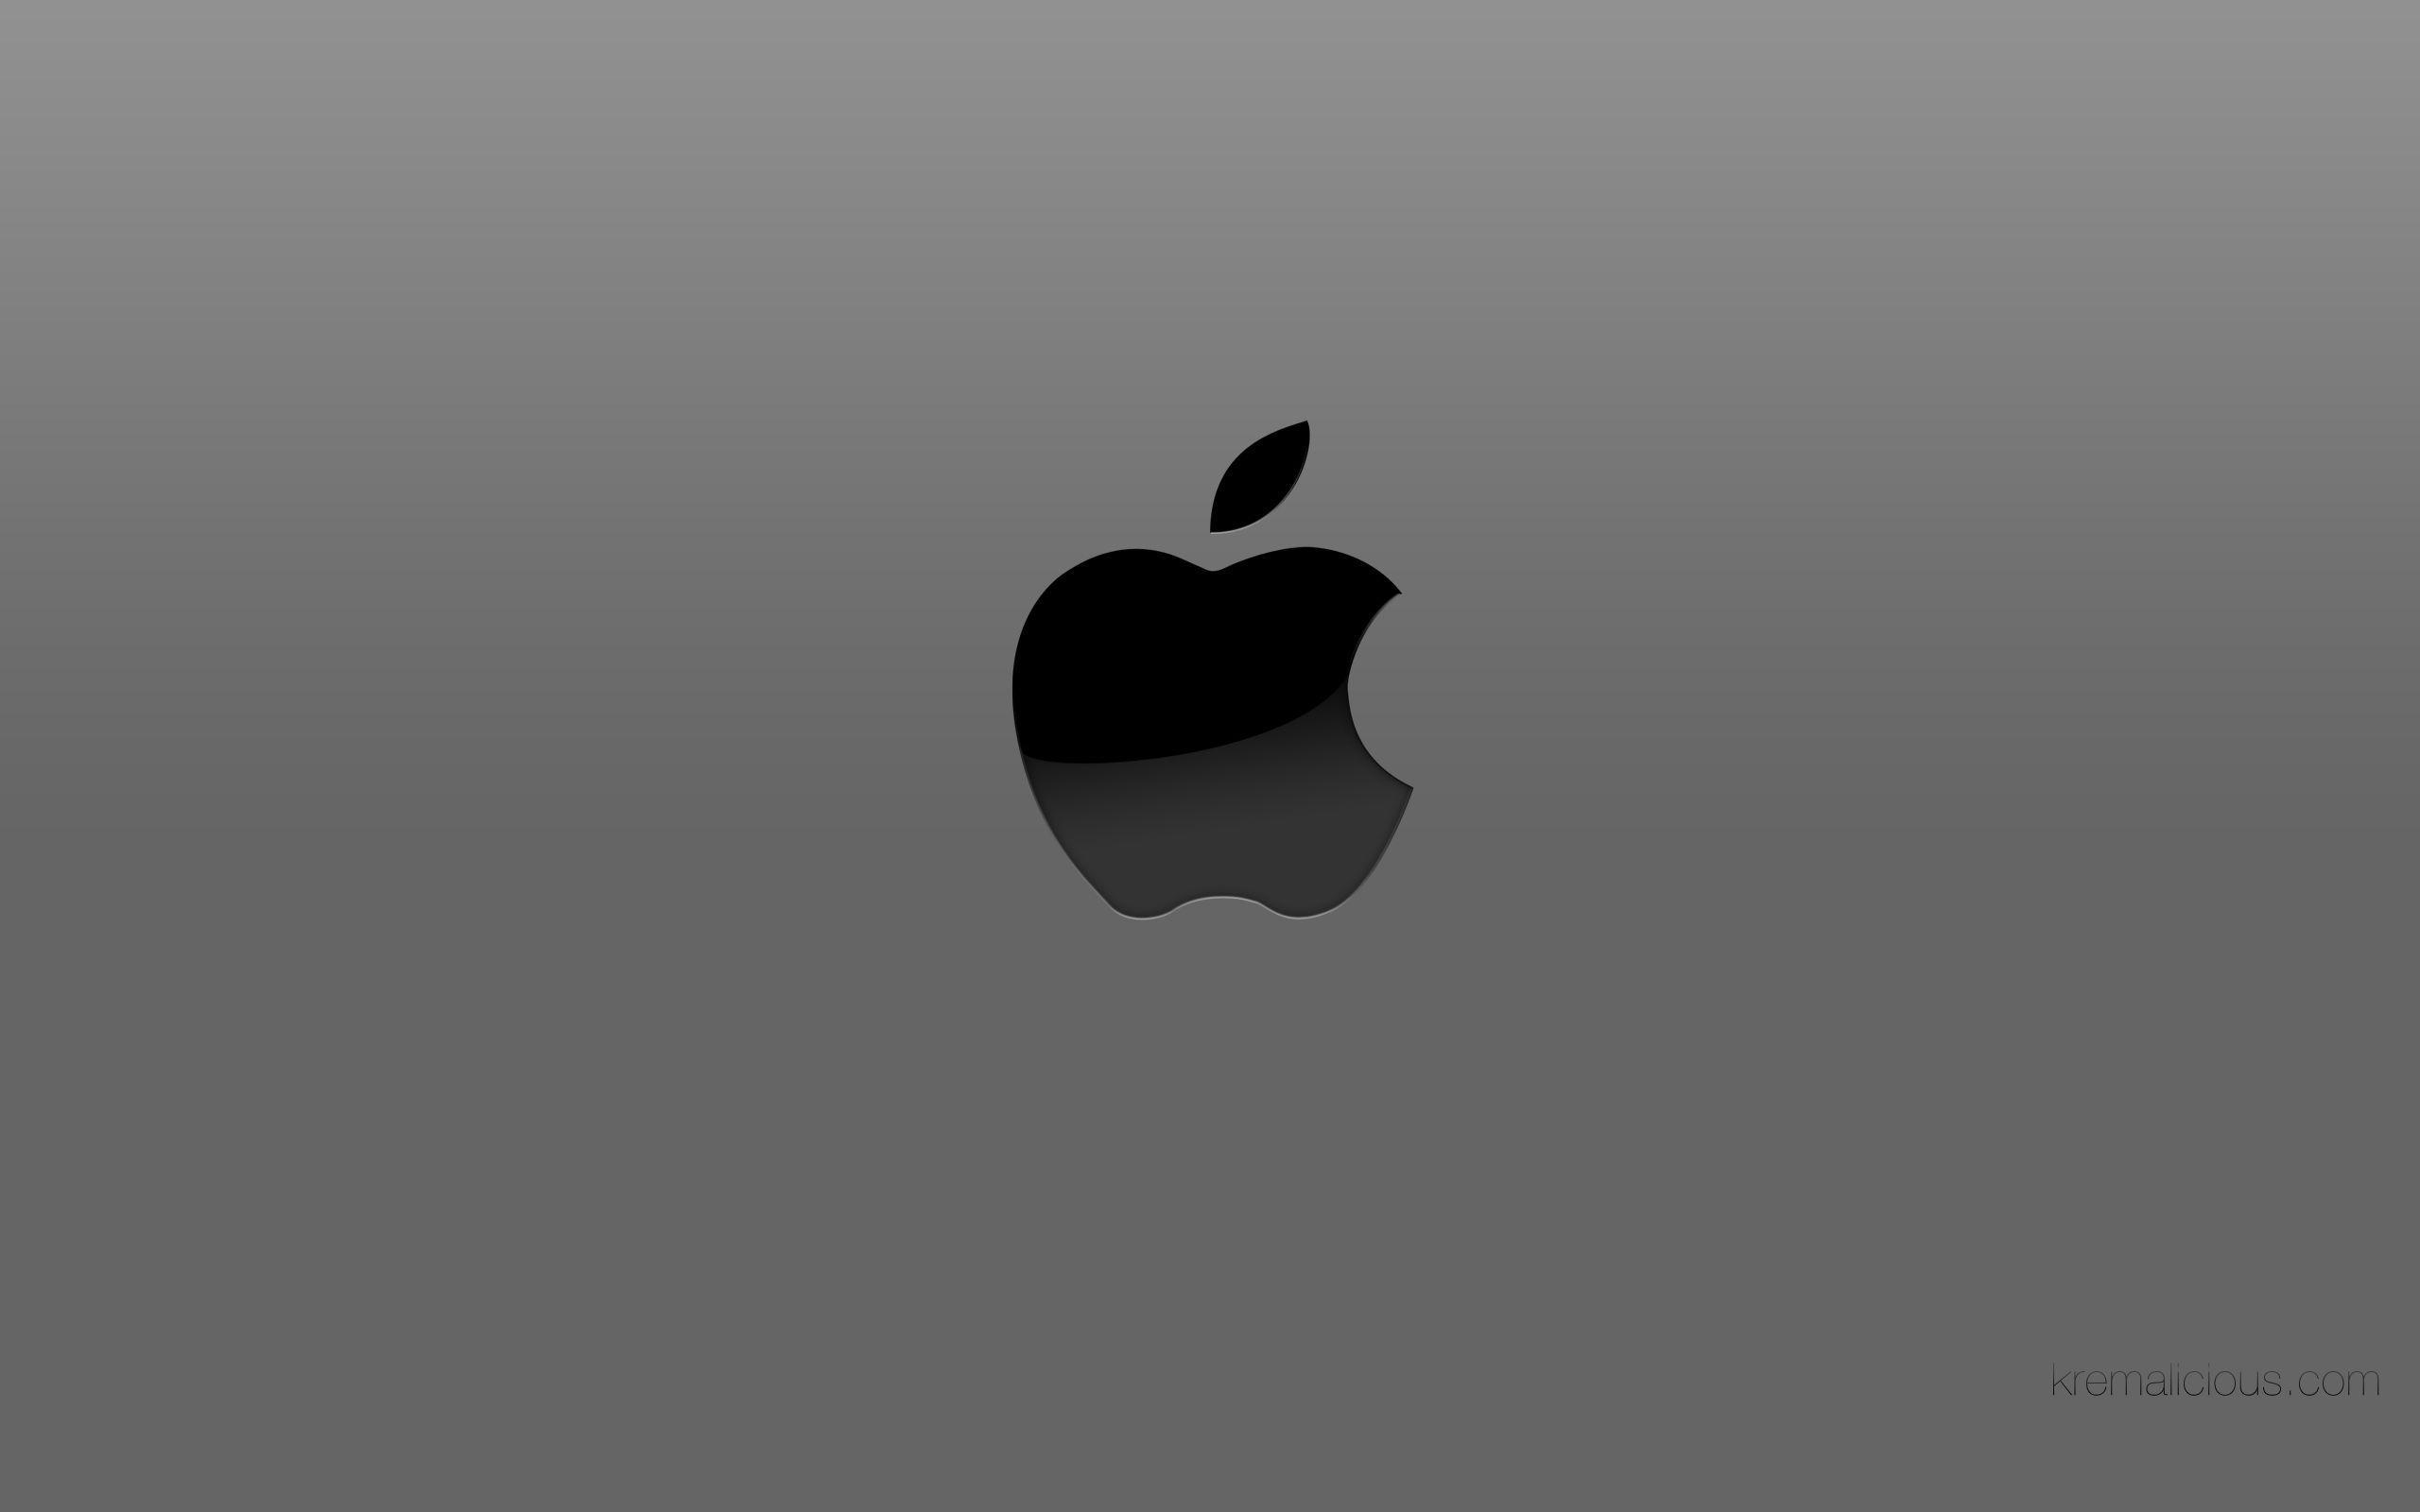 Wallpapers For > Apple Logo Transparent Backgrounds